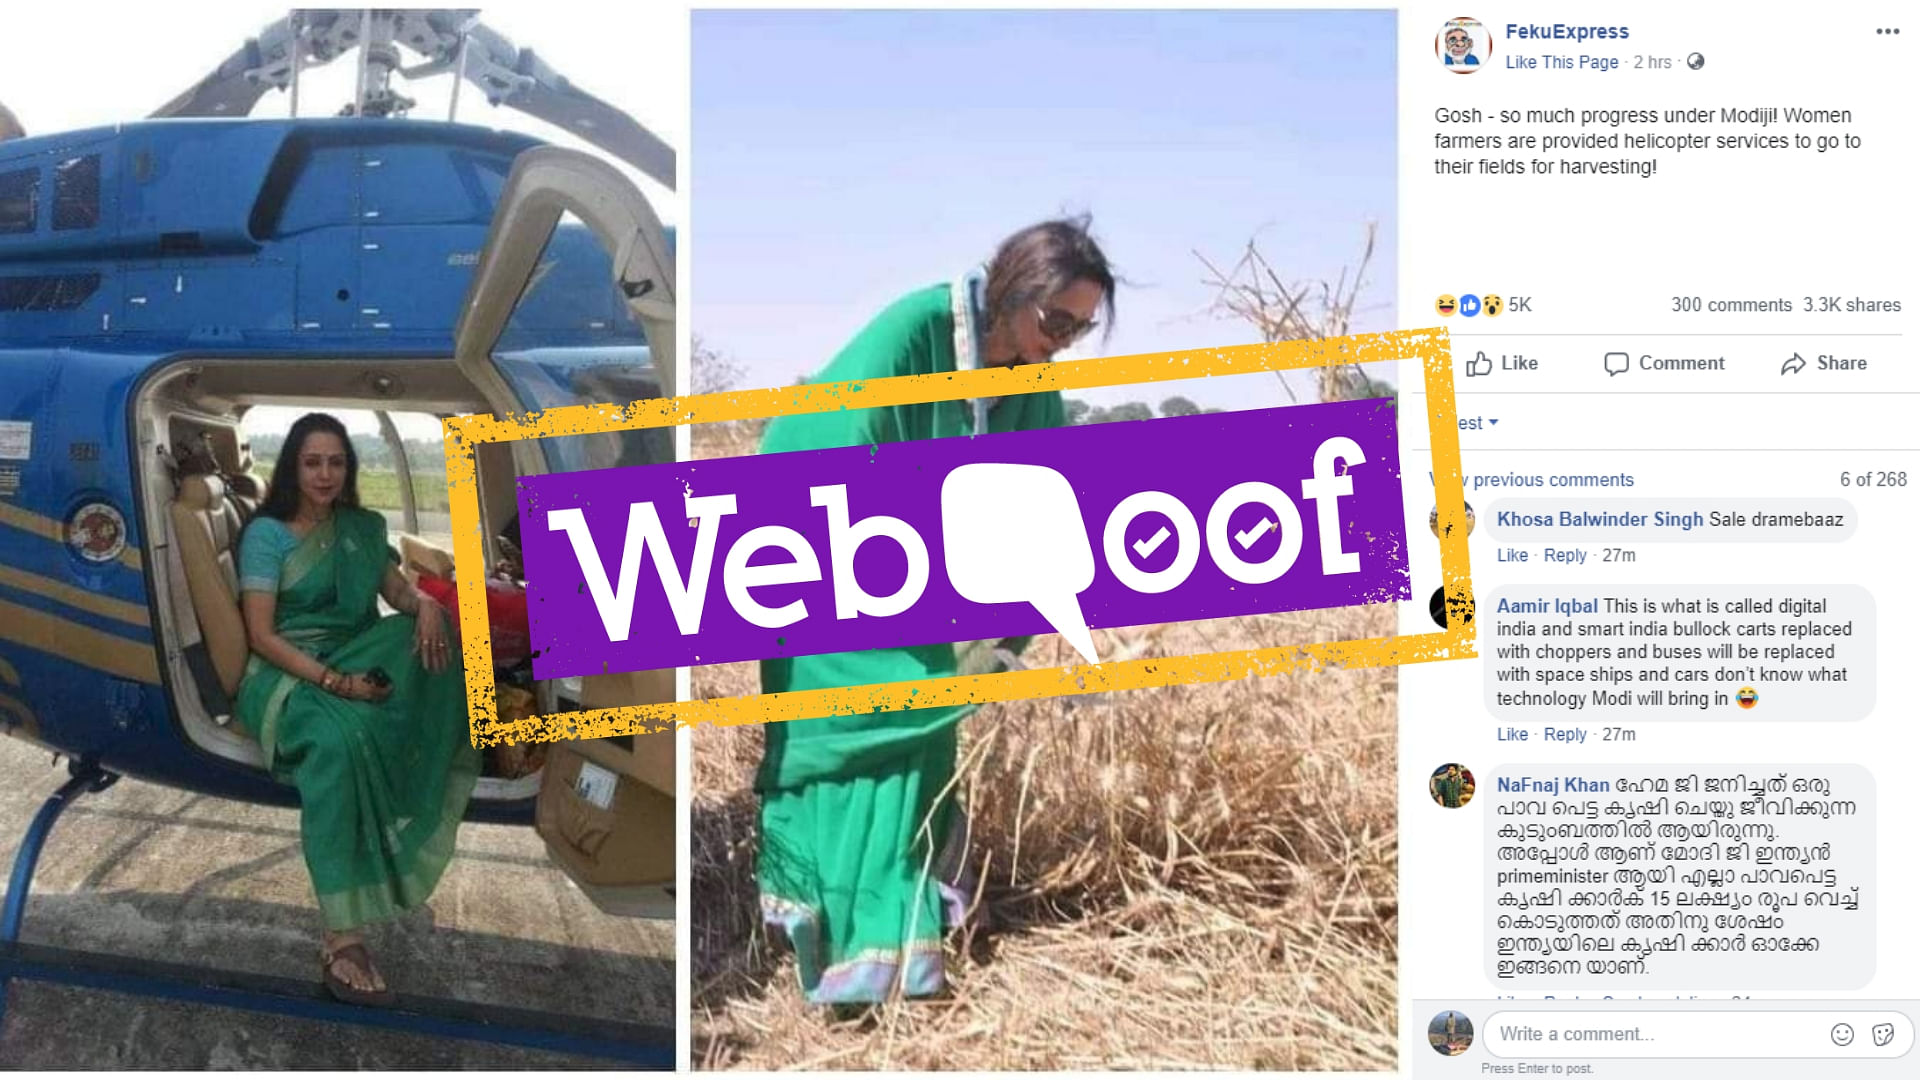 Old photos of Hema Malini campaigning in 2014 and 2015 were used to claim that she flew in to the farm where she was spotted cutting crops on 1 April.